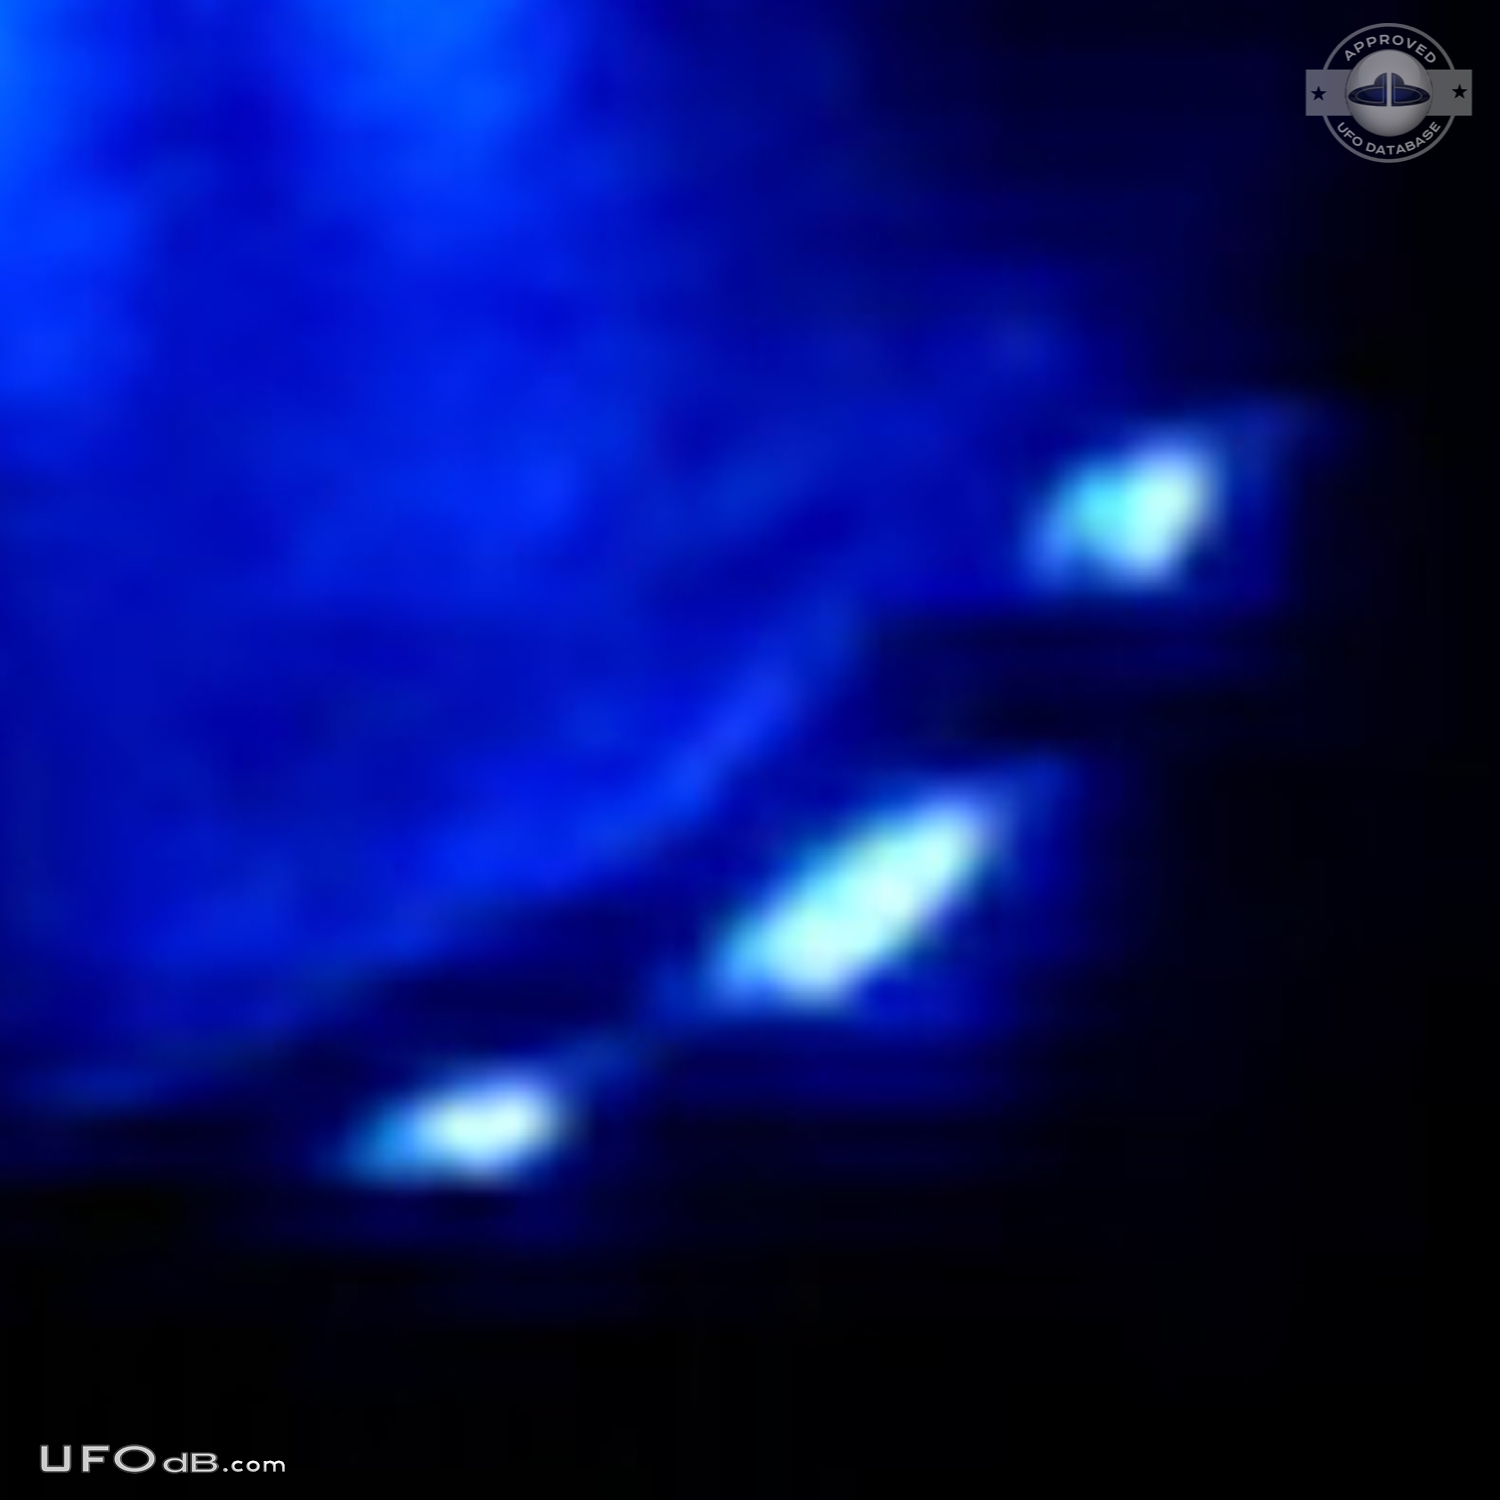 Incredible UFO images taken from video - Pipestone, Minnesota - 2012 UFO Picture #536-4